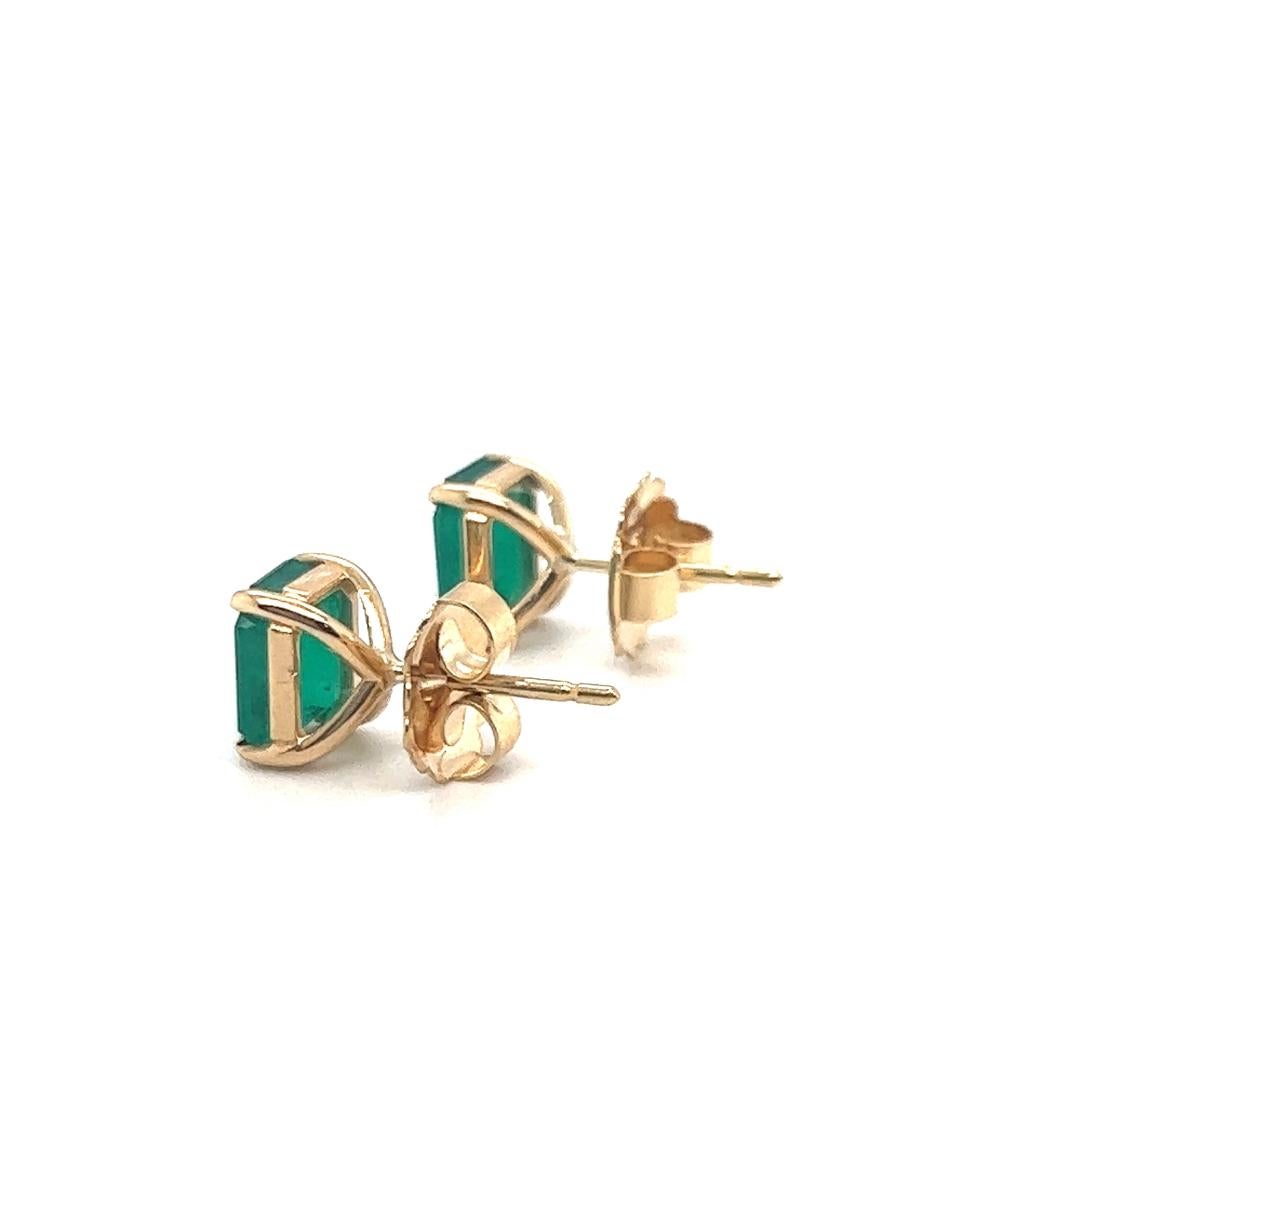 4 Carat total weight Colombian Earth Mined Emeralds
18k Yellow Gold
Emerald Cut
Muzo Color
Stud Earrings
Hand Made in the USA Miami, FL
Colombian Emerald Earrings, boasting a total weight of 4 carats. These exquisite earrings feature Earth Mined